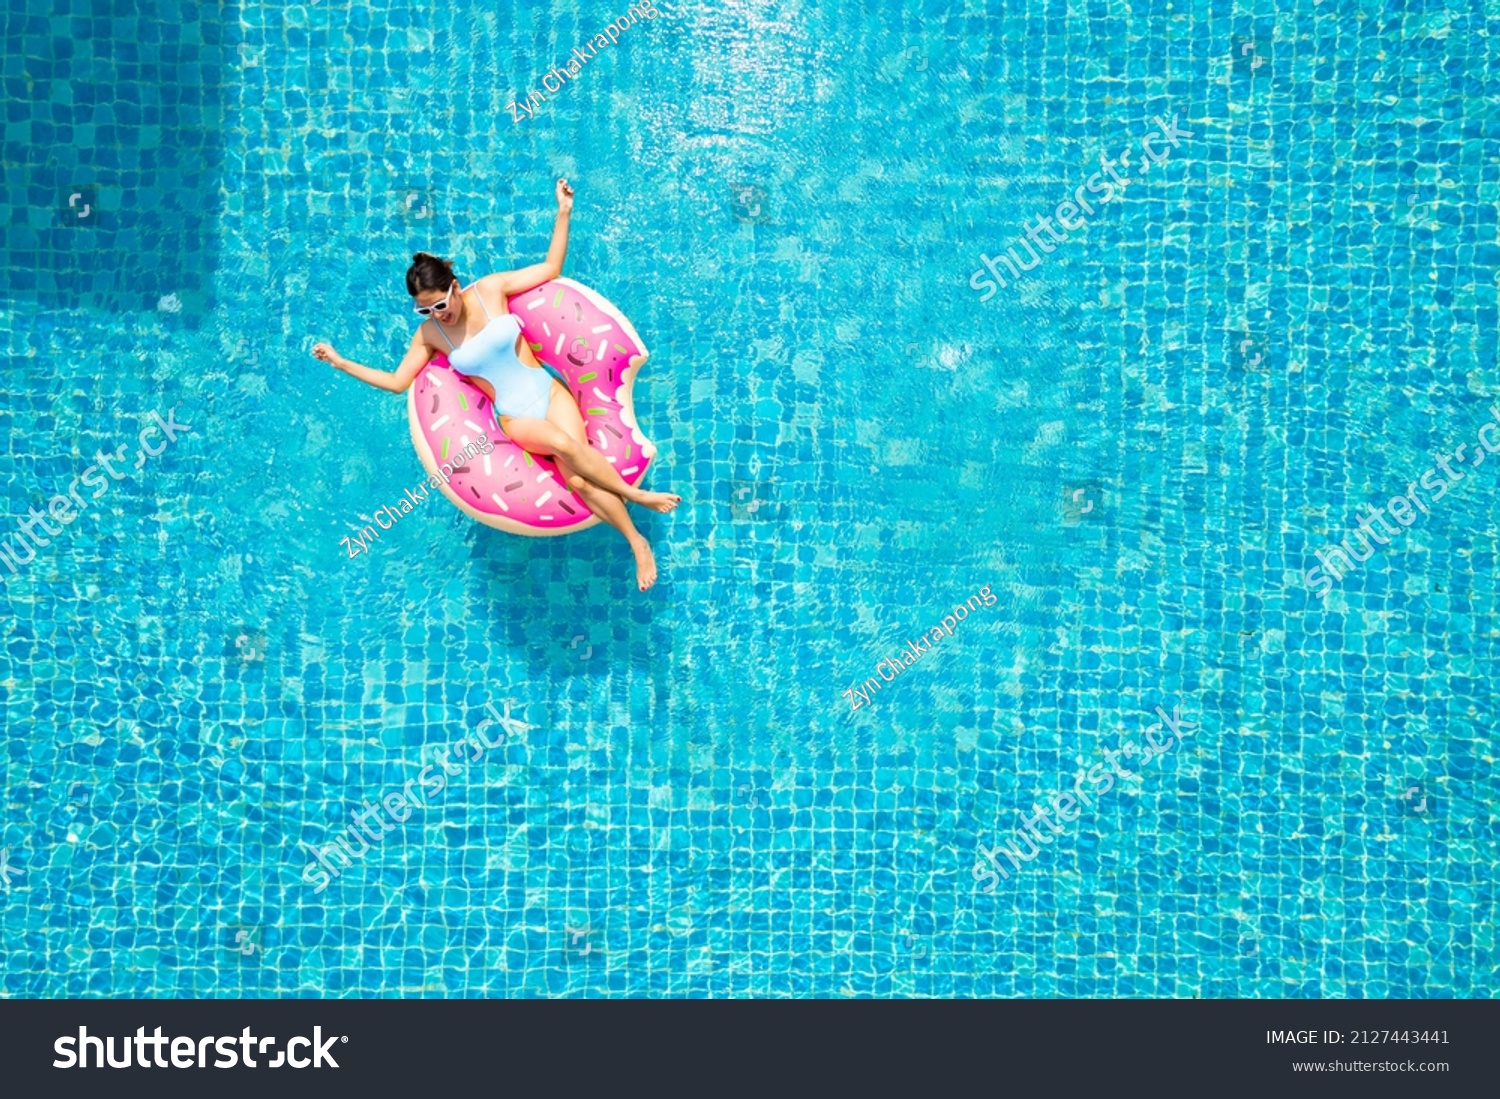 2,911 Lilo In Pool Images, Stock Photos & Vectors | Shutterstock